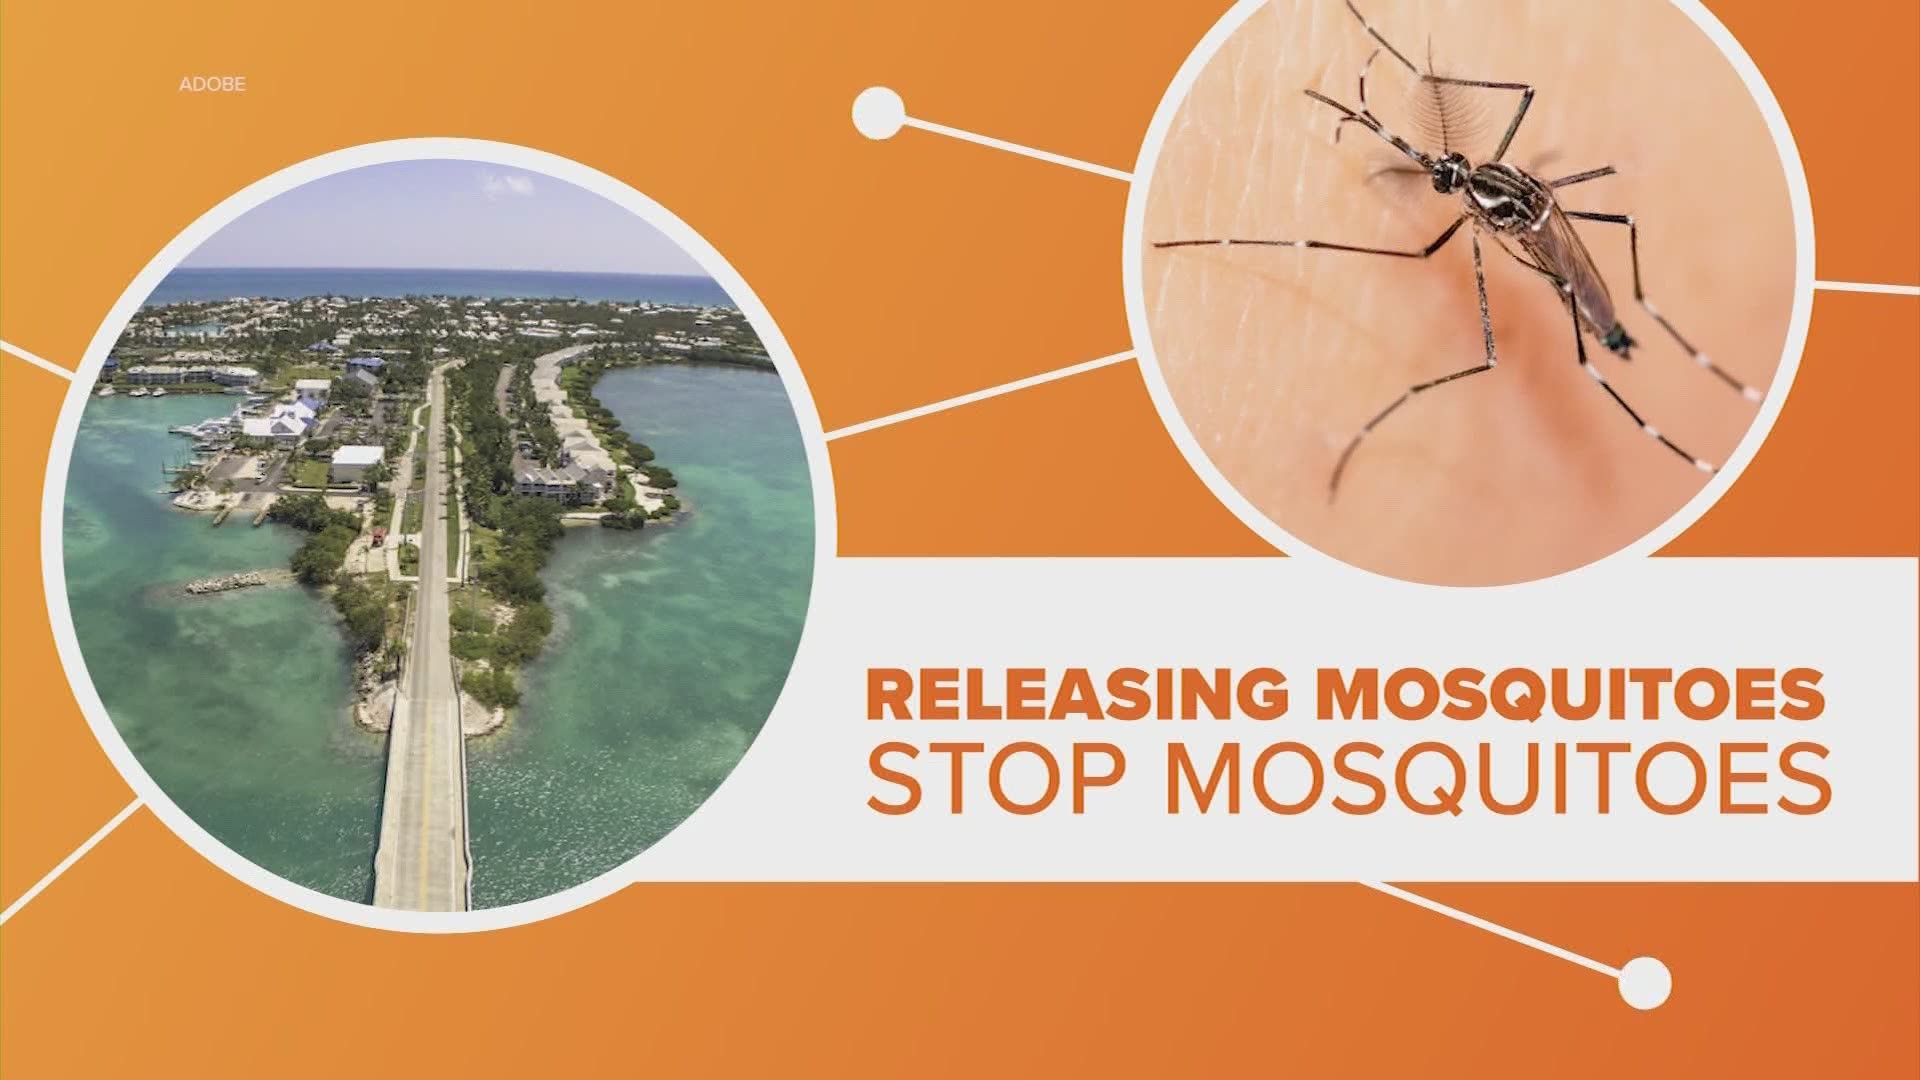 Florida will start releasing close to 150,000 genetically modified mosquitoes in an effort to kill off the mosquitoes that carry diseases like zika and yellow fever.